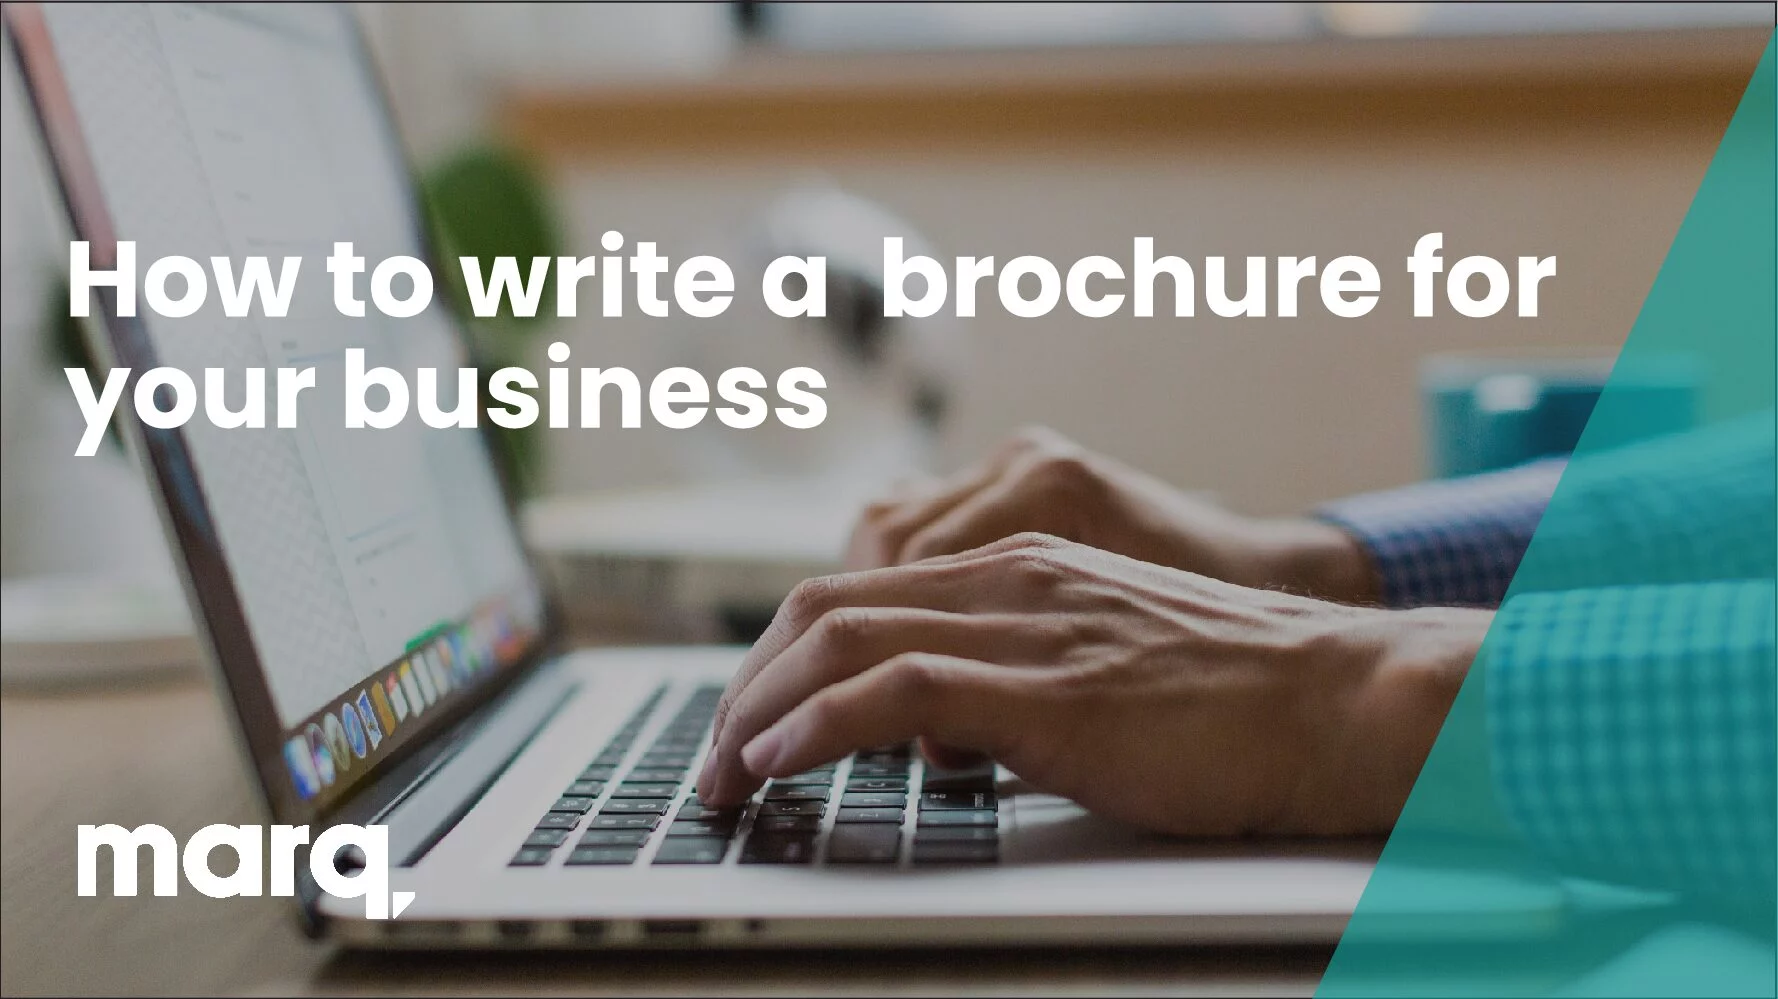 How to write a brochure for your business